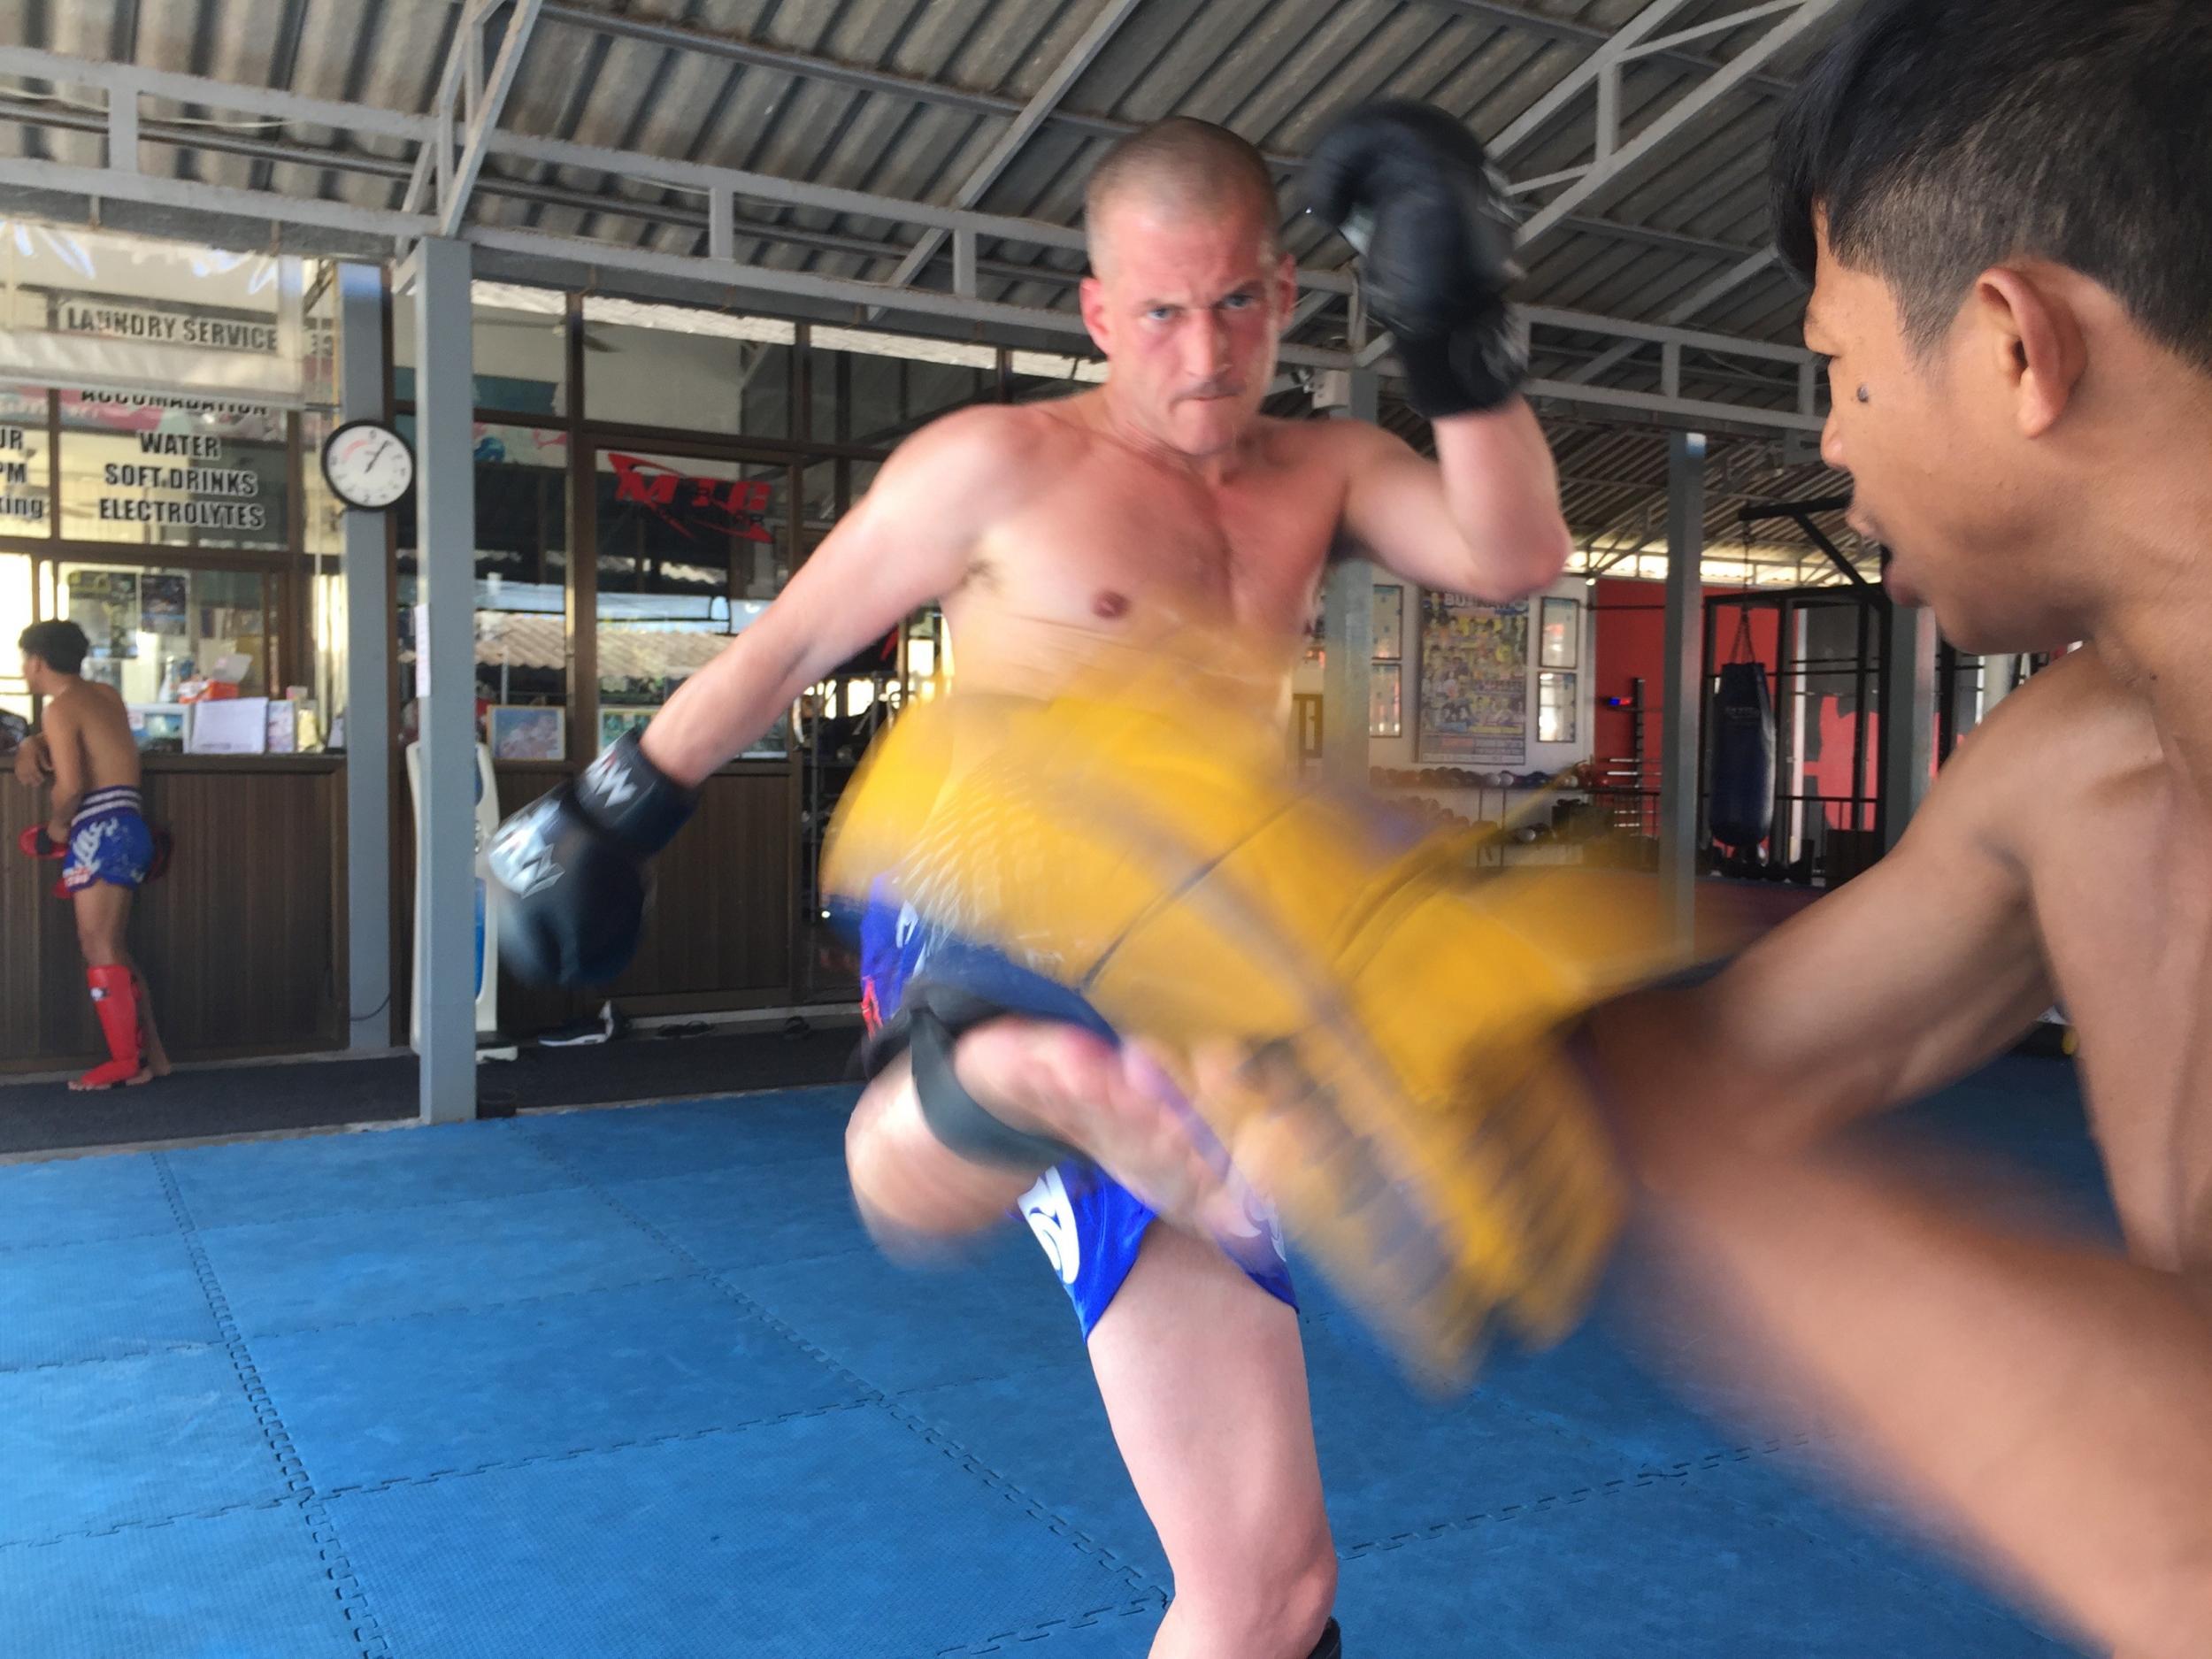 Fight club: Lamai Muay Thai in Koh Samui is a great place to train